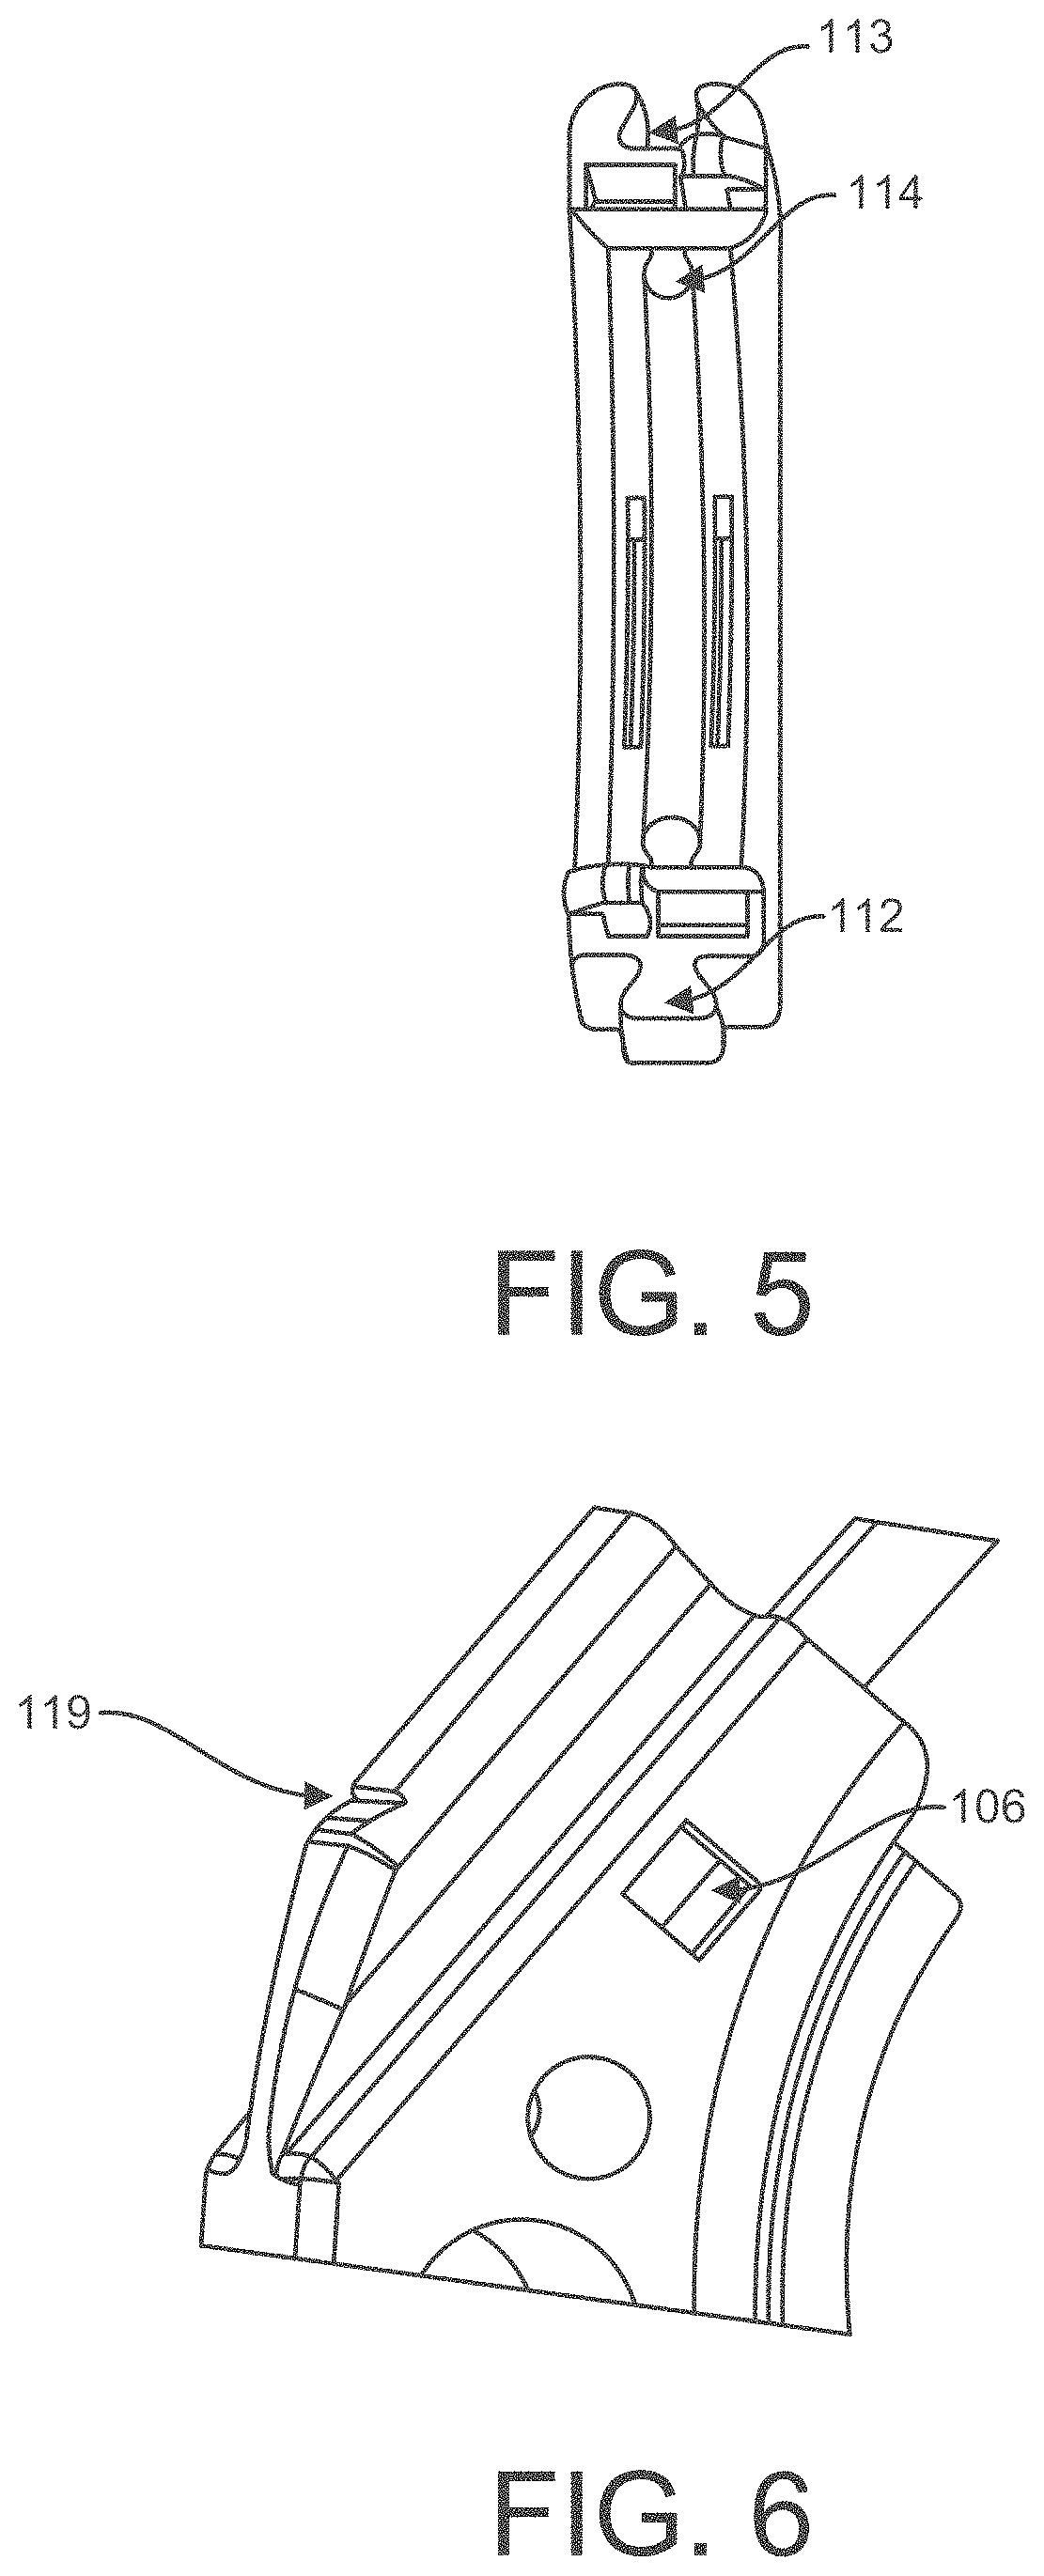 Inter-connecting locking mechanism and grip channel